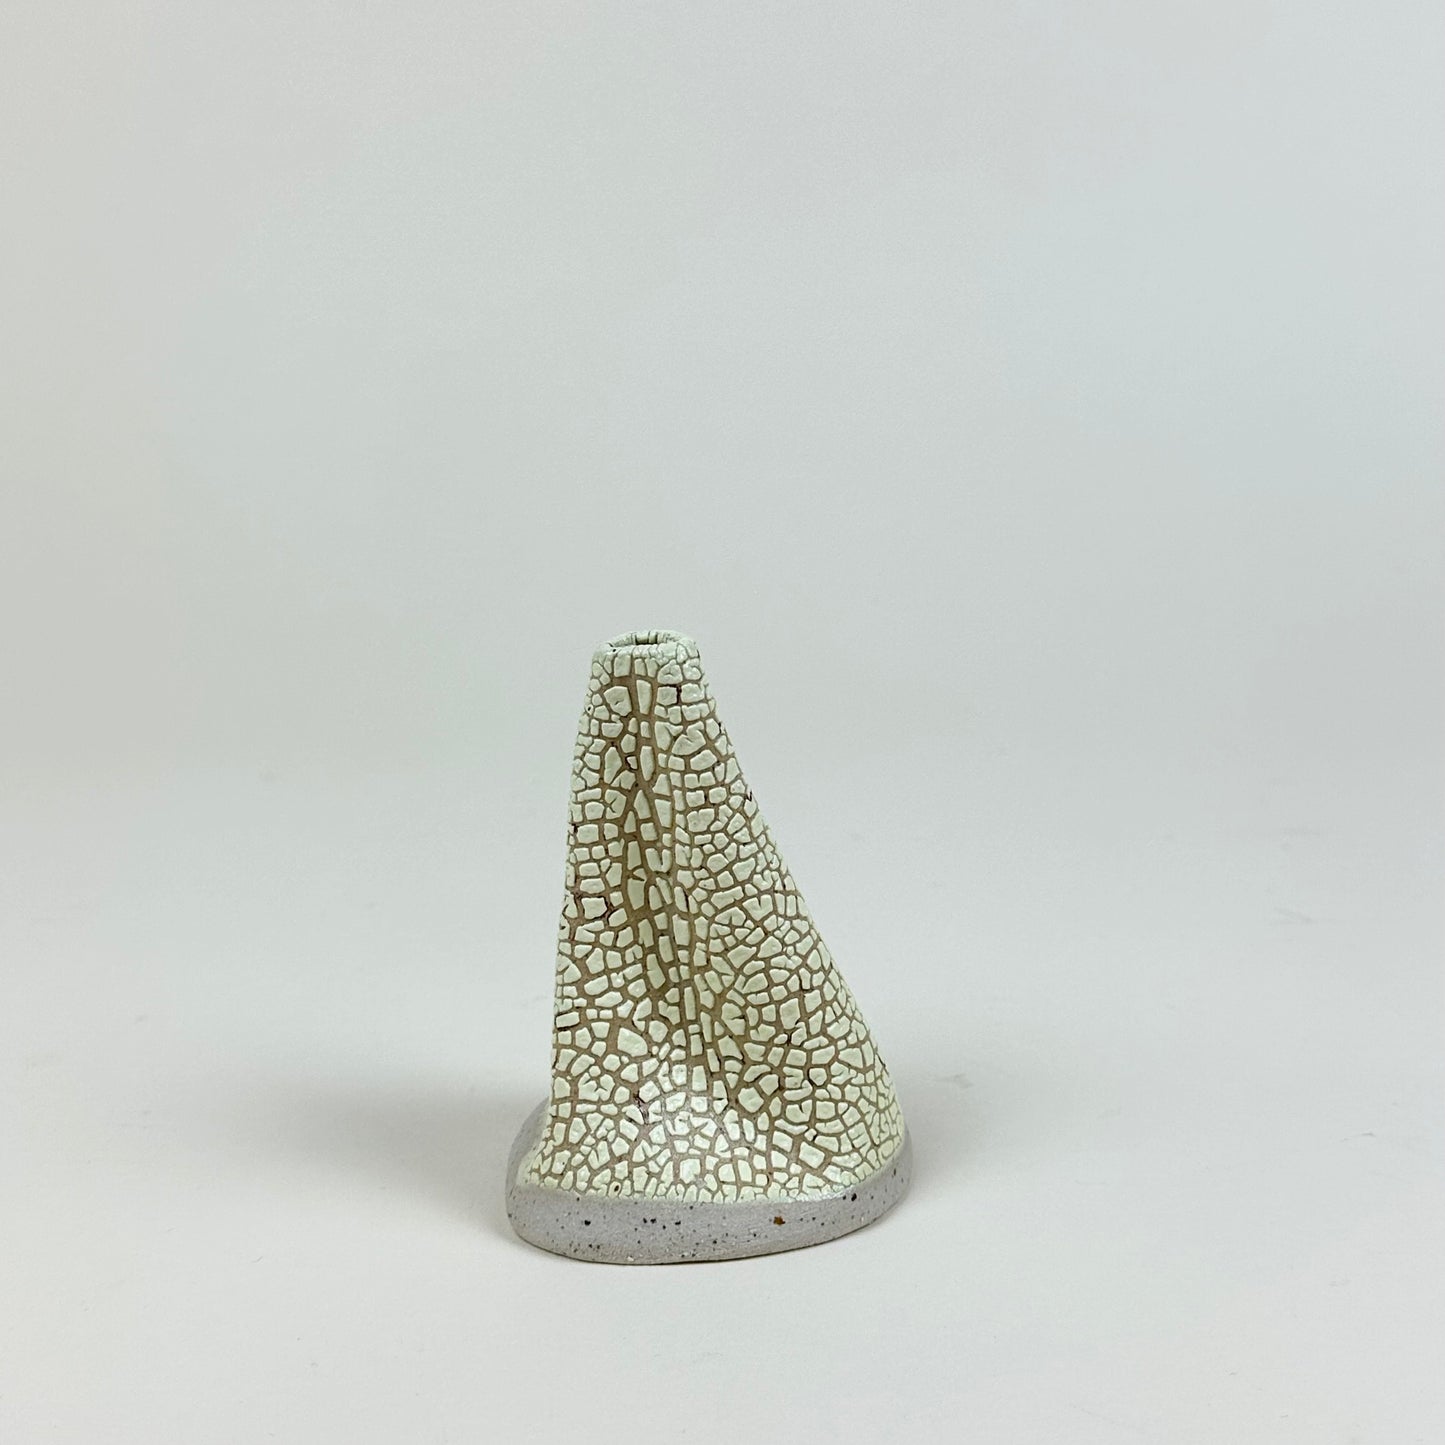 Light yellow and beige volcano vase (S) by Astrid Öhman.